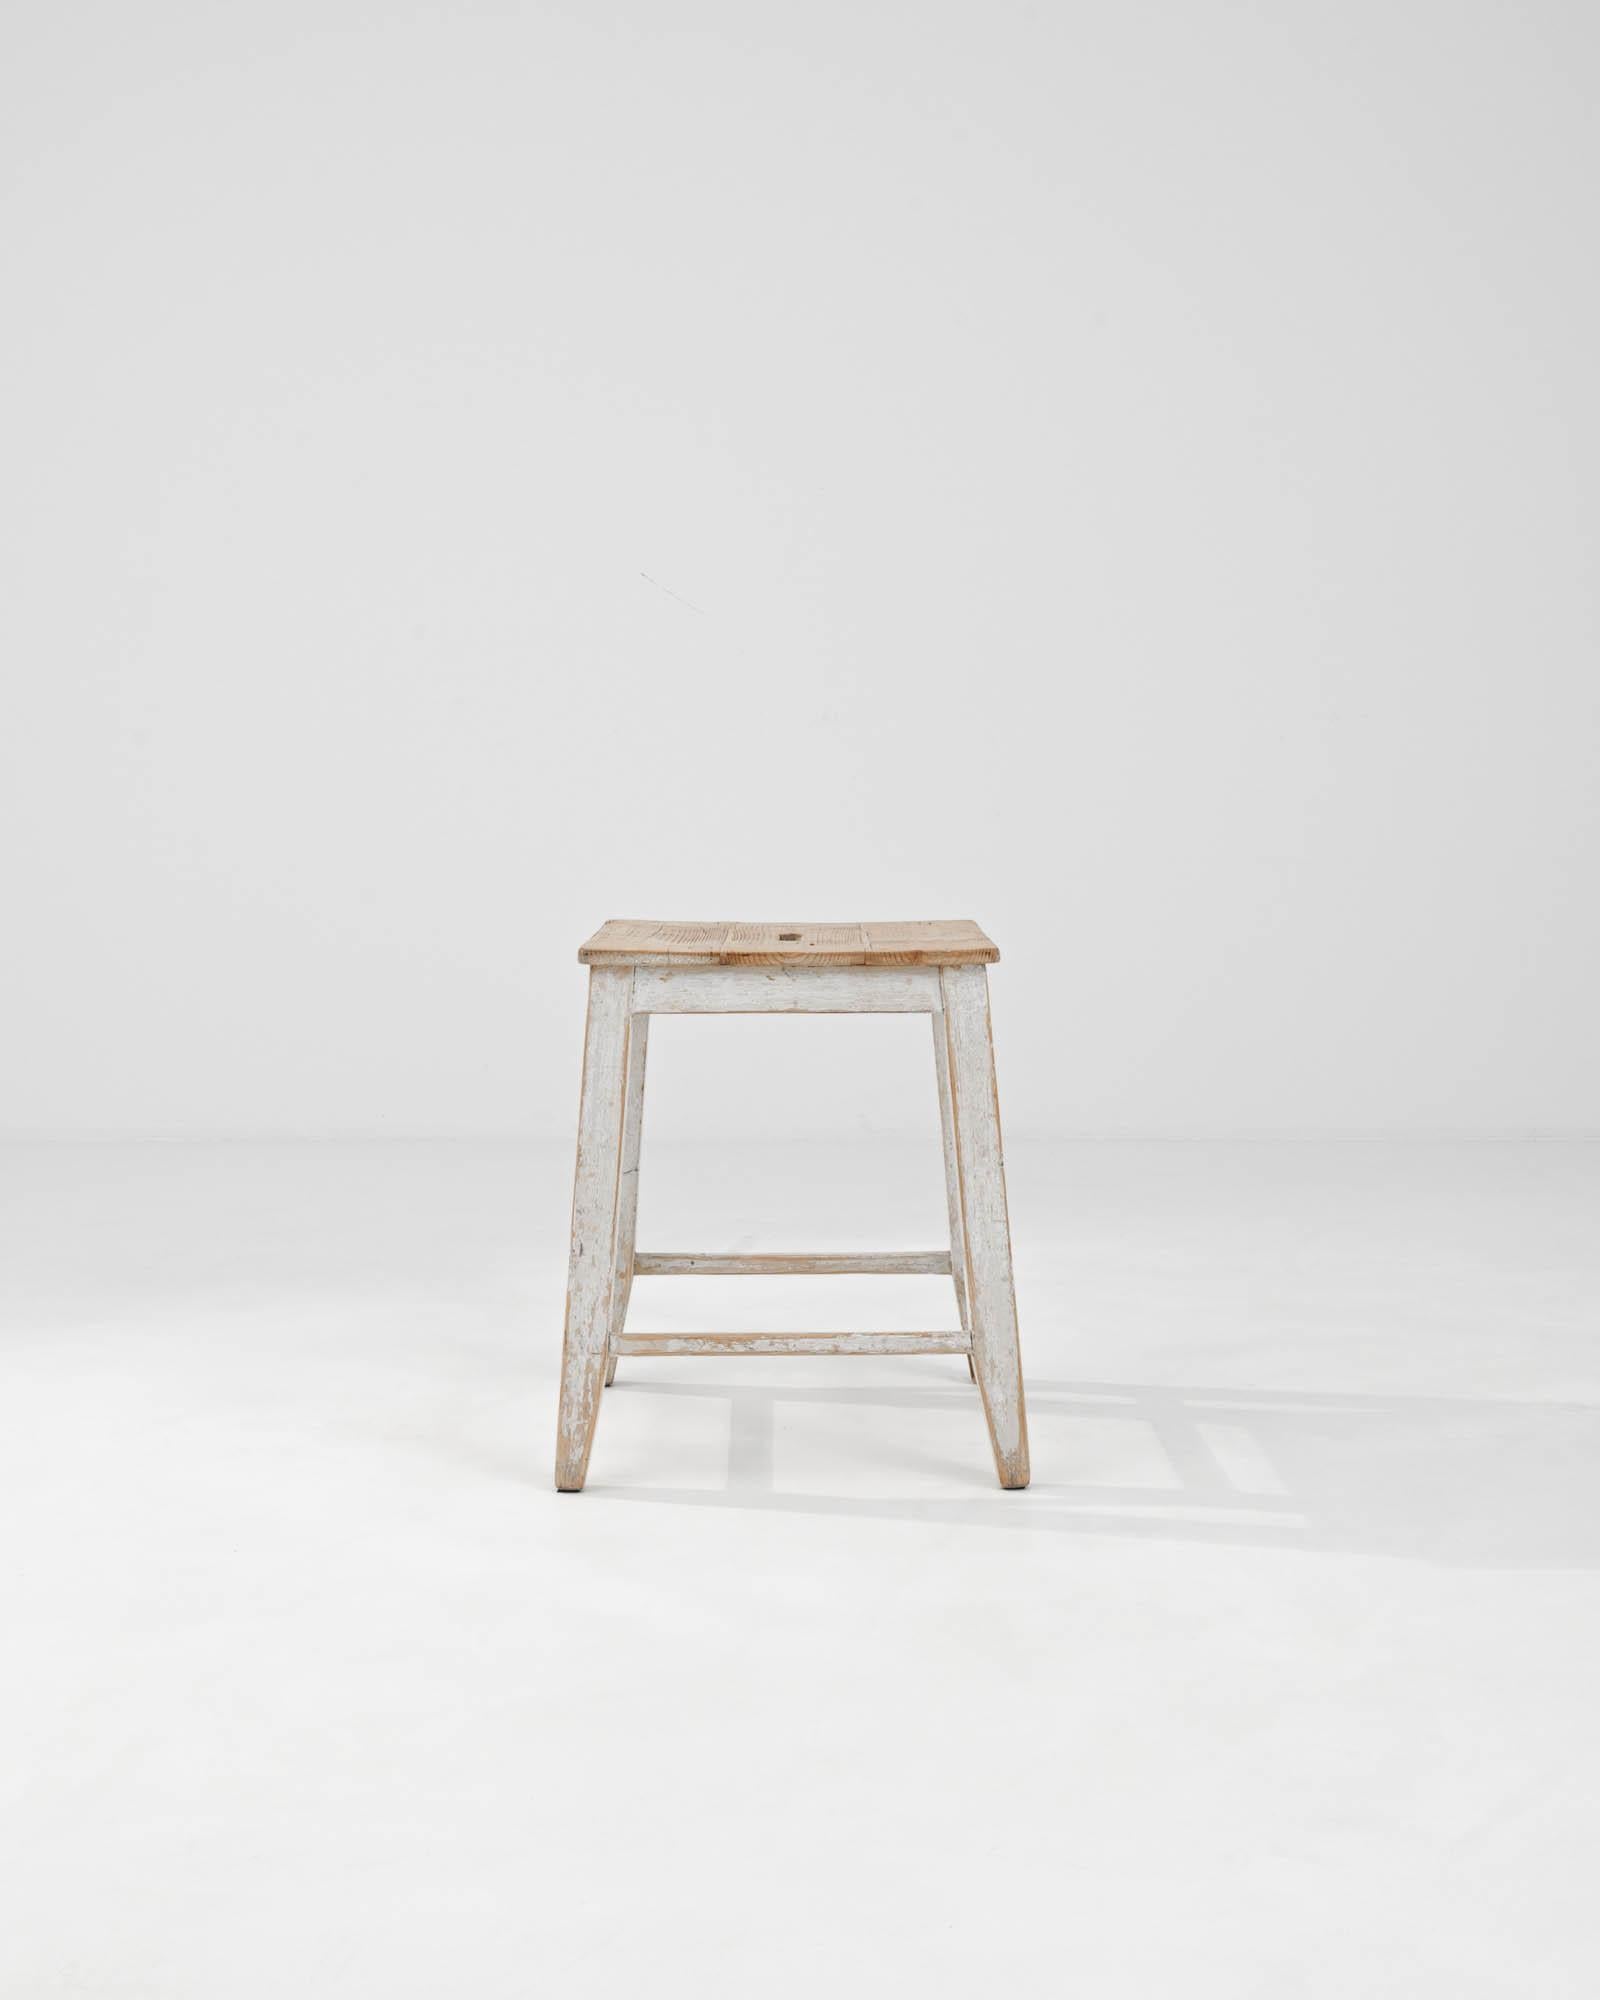 Introducing our enchanting 1900s Central European Wooden Stool, a delightful vintage accent with timeless appeal. Crafted with care, this simple yet charming wood stool exudes rustic elegance. Its splayed legs, joined by square stretchers and